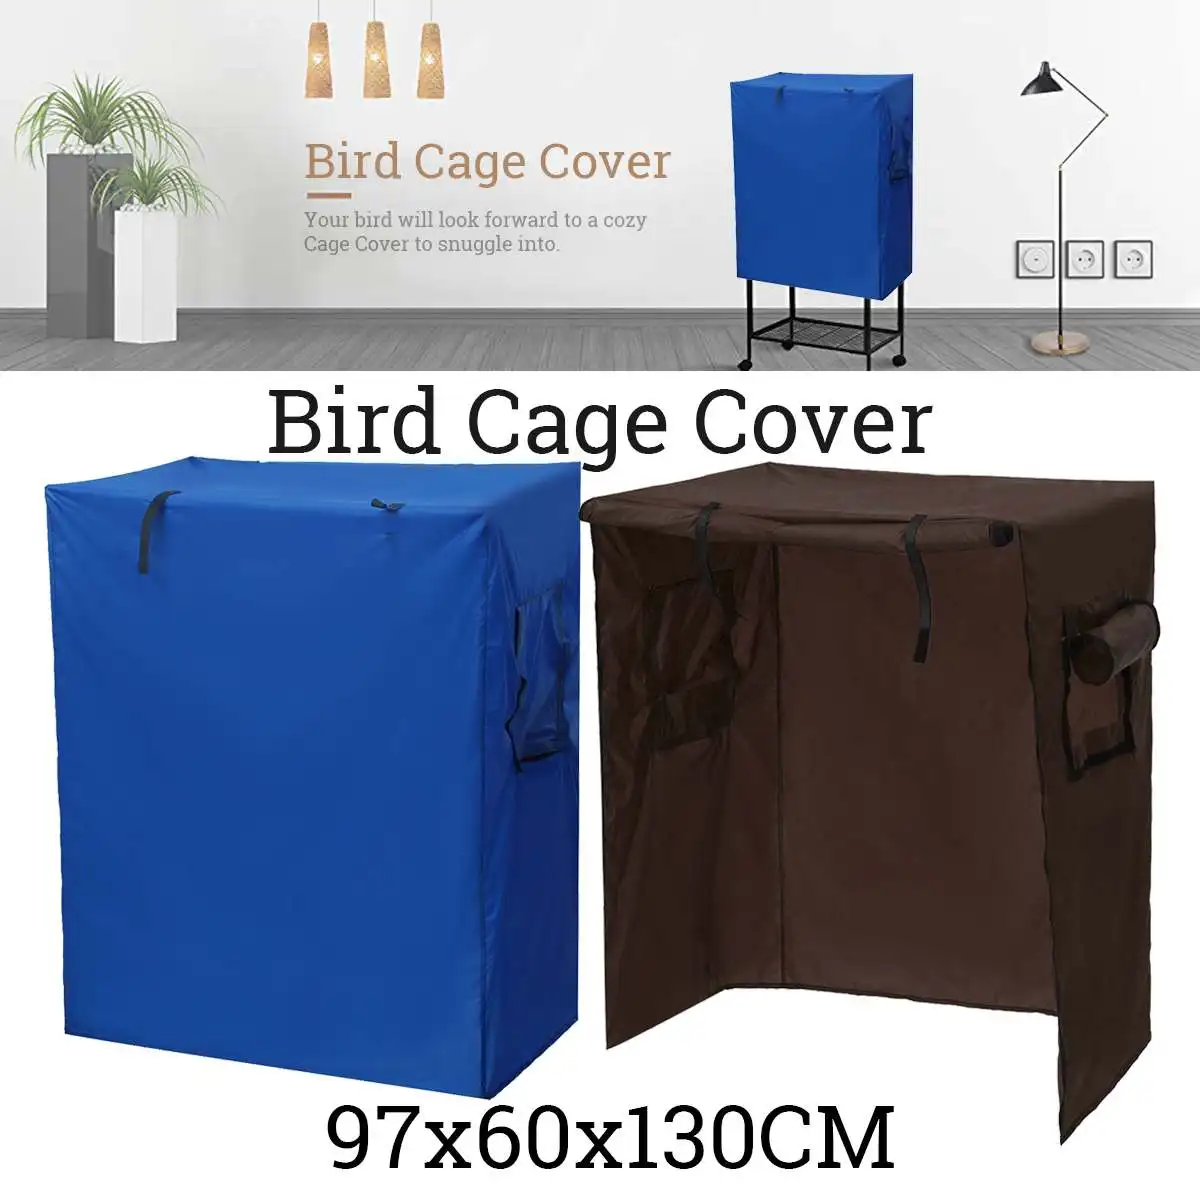 

Universal Bird Cage Cover Seed Catcher Parrot Aviary Guard Bag Shell Skirt Cover sunshade Breathable dustproof Bird Supplies